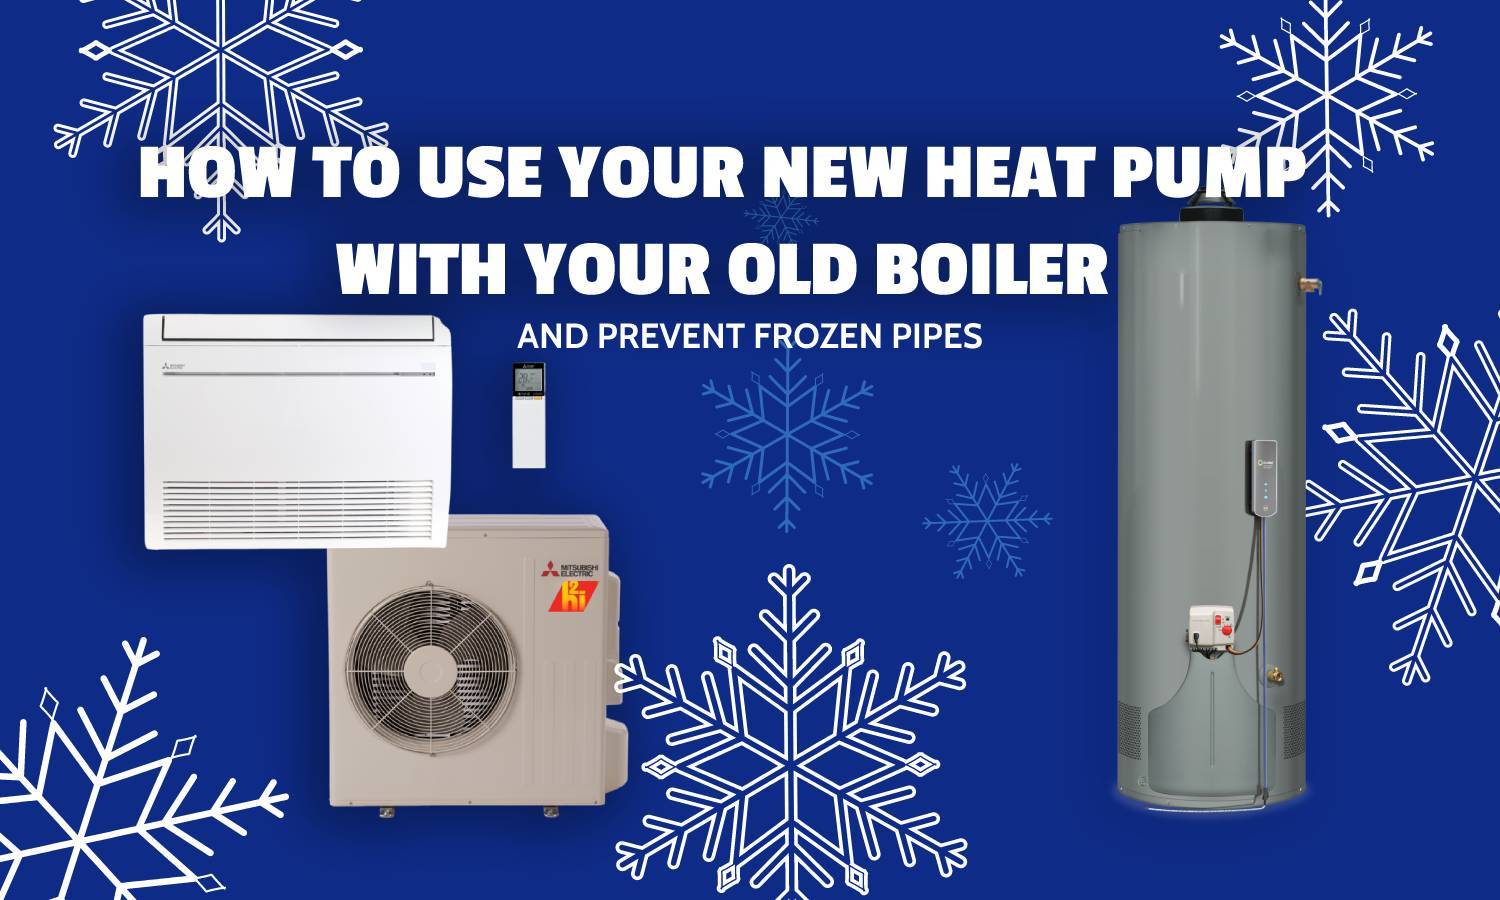 How to Use Your New Heat Pump with Your Old Boiler